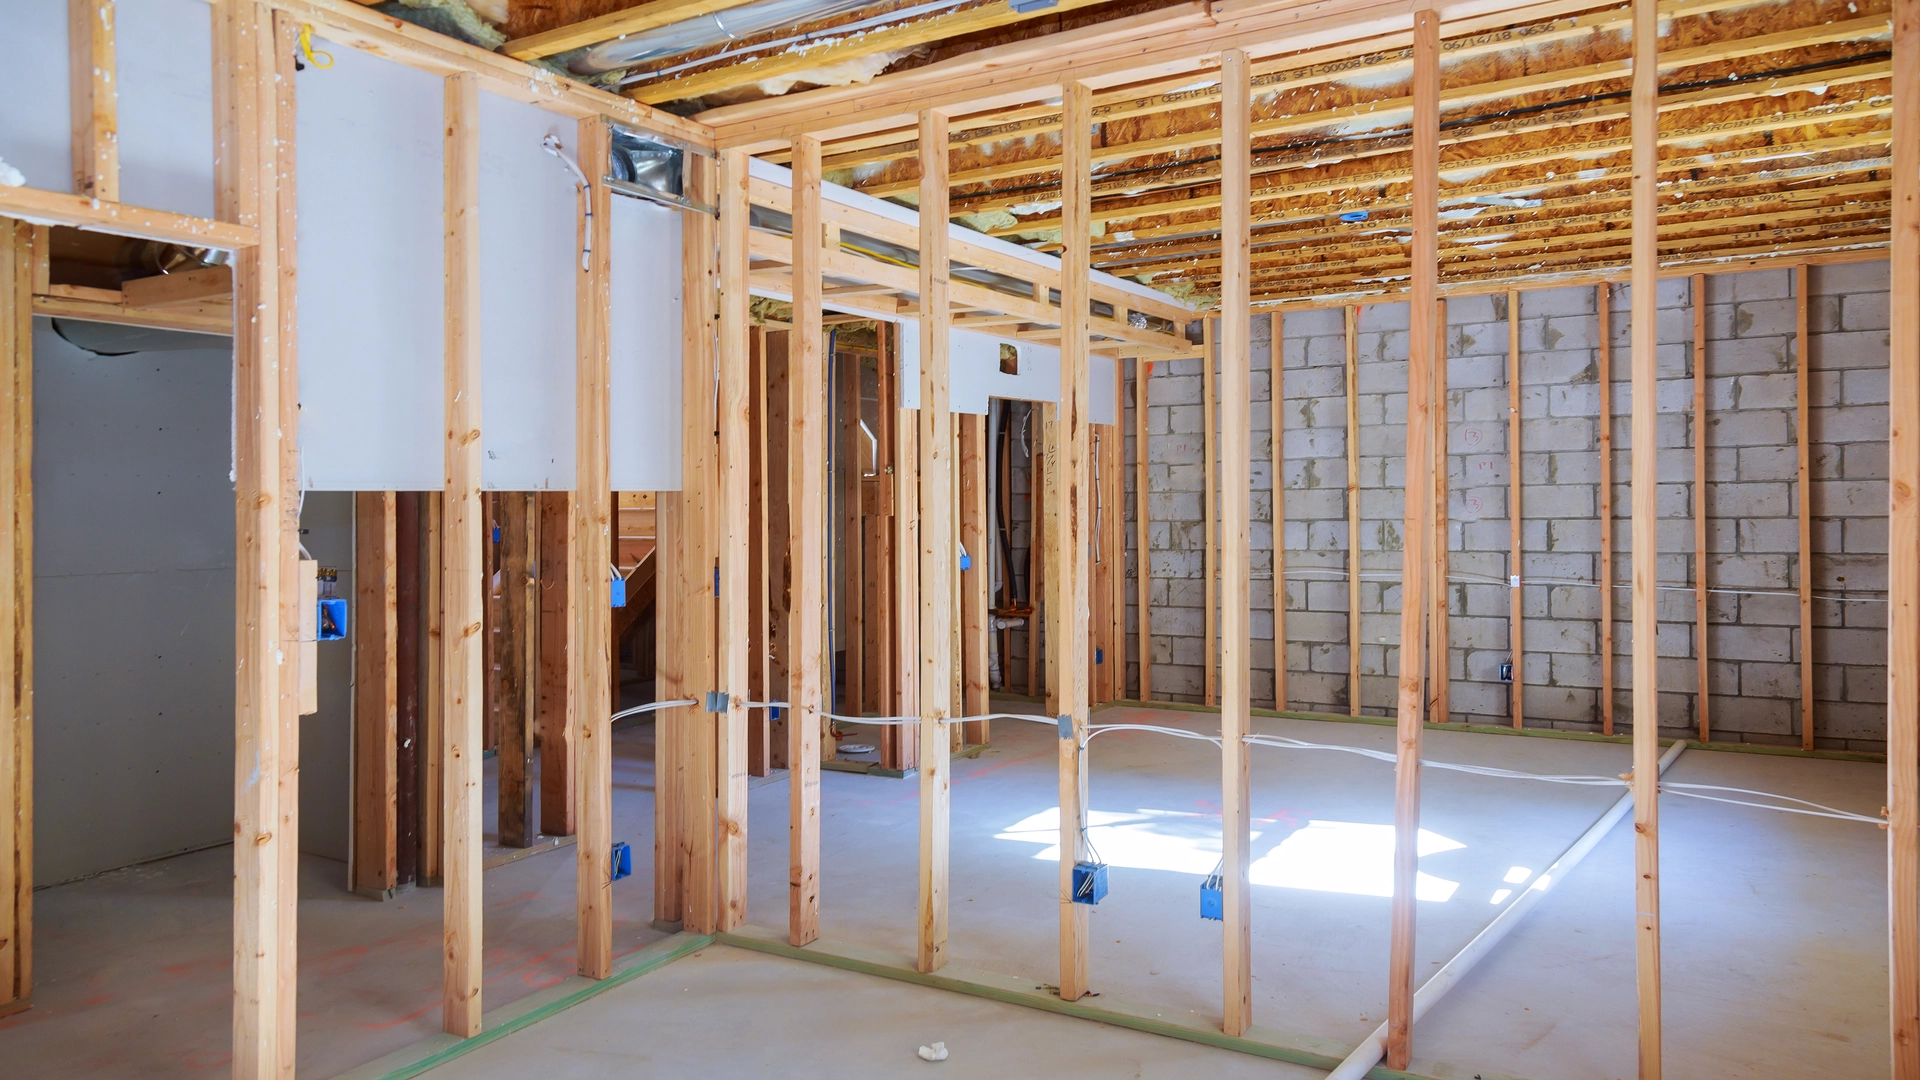 Building and maintaining the basement with basement support beams